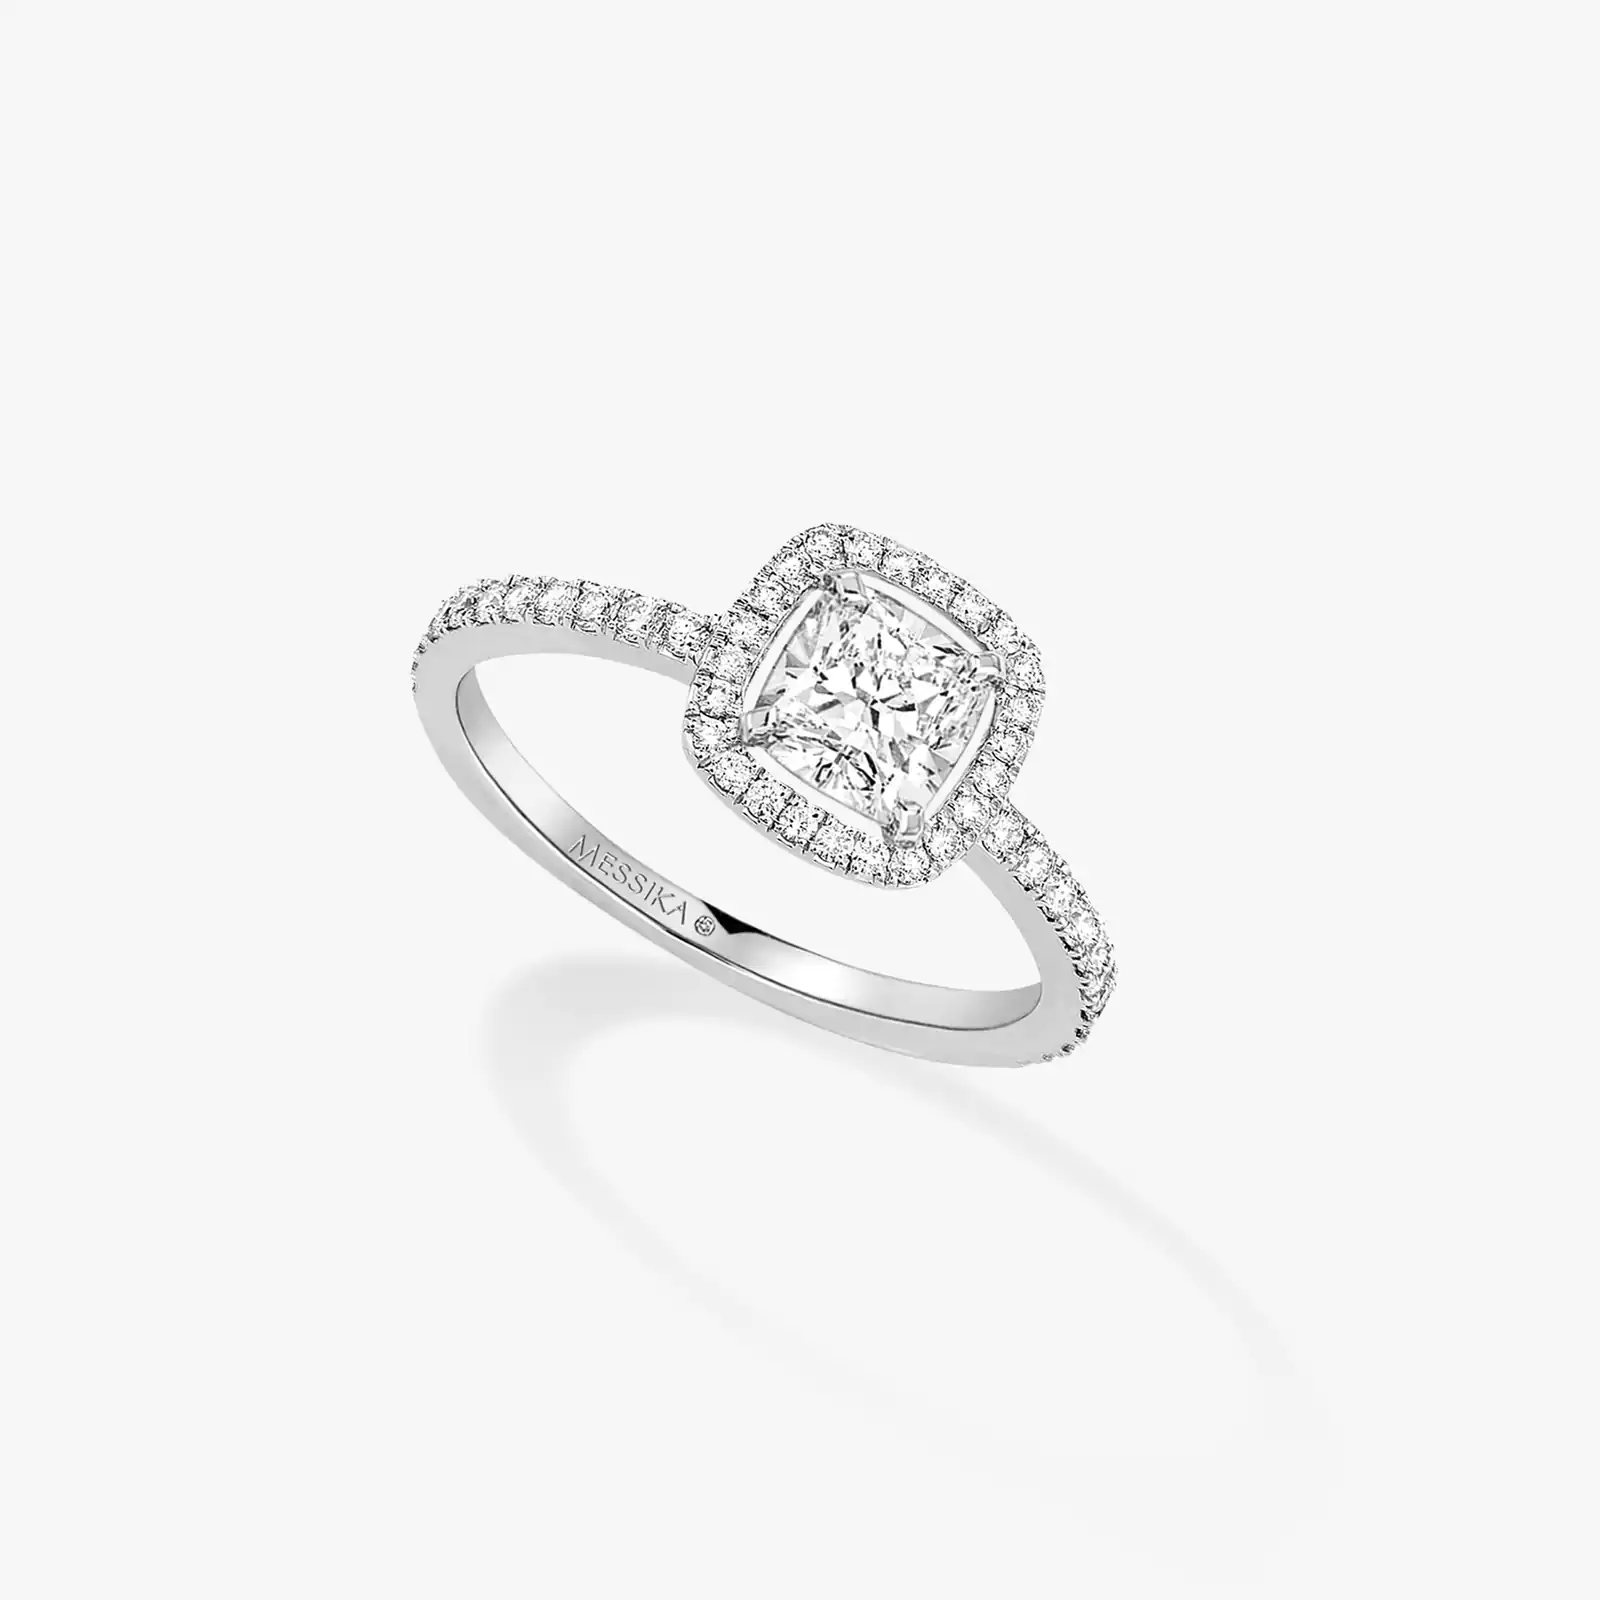  M-Love Solitaire Cushion Cut  White Gold For Her Diamond Ring 08008-WG